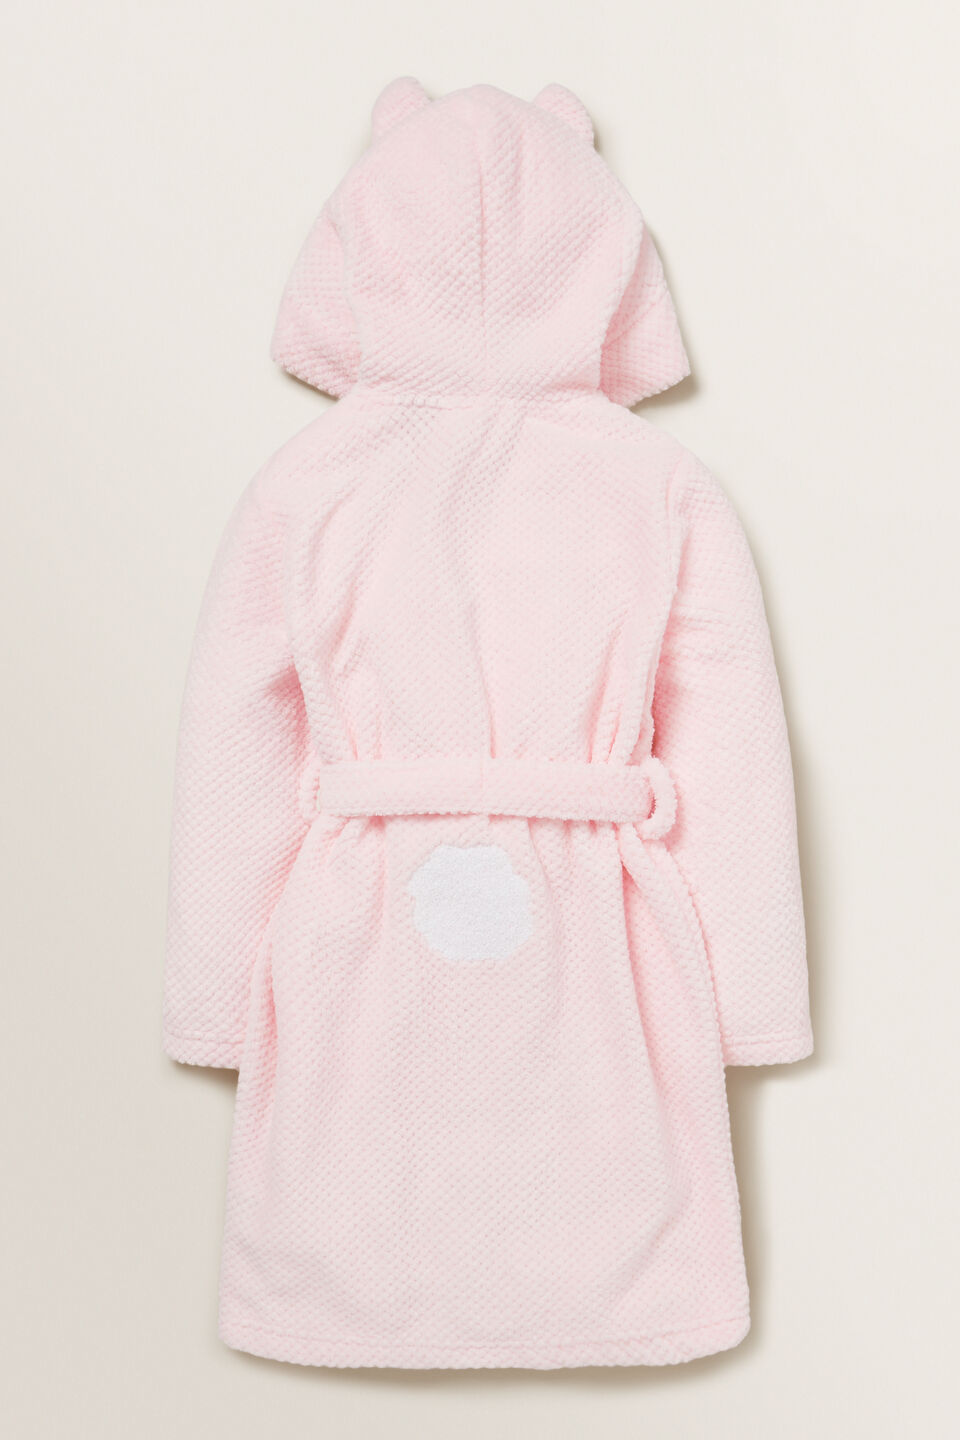 Bunny Dressing Gown  